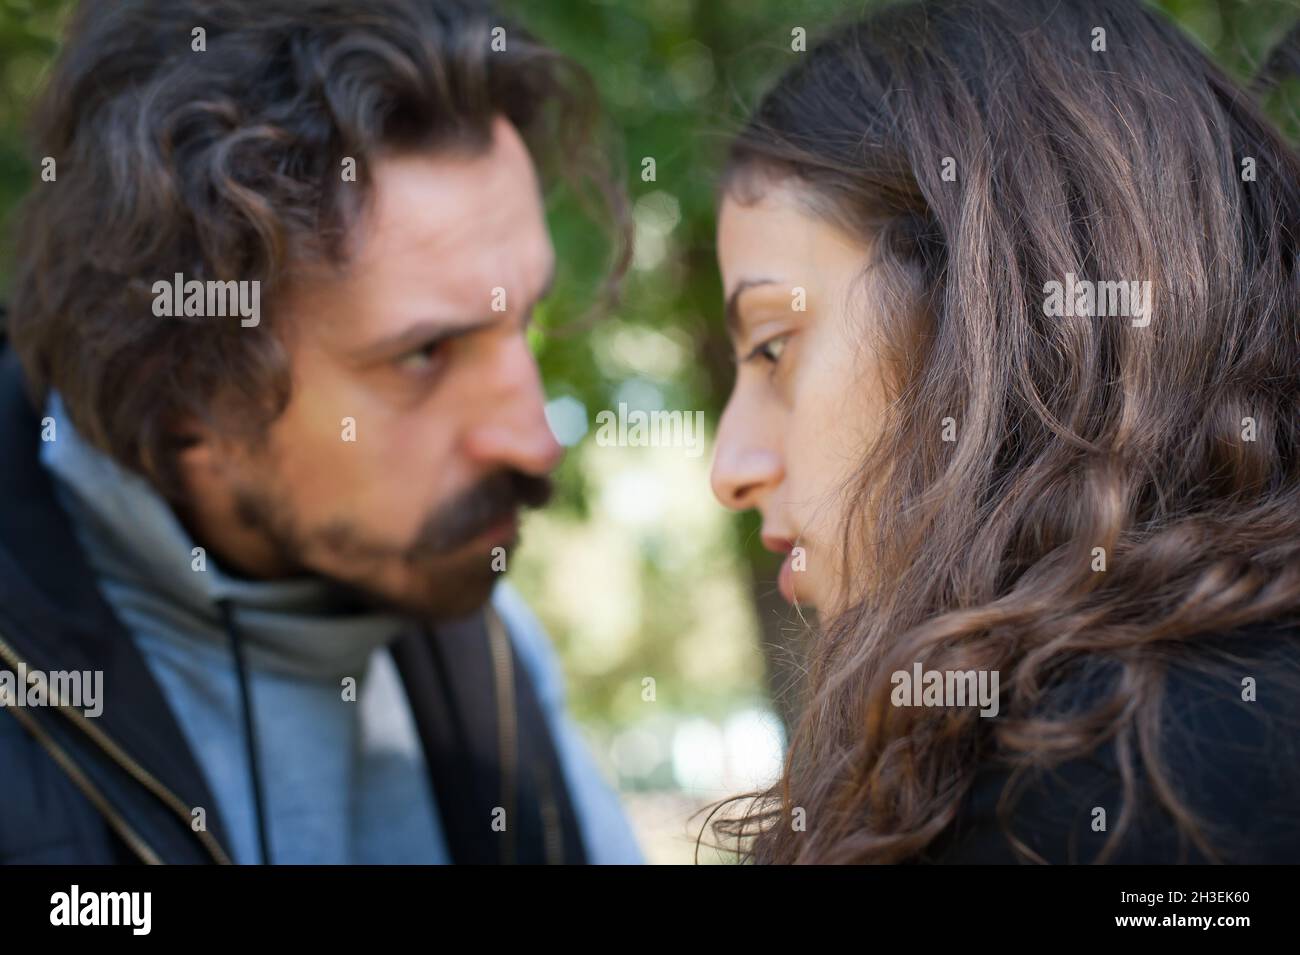 Bully and abuser, a jealous boyfriend abuses his girl girlfriend, verbally and physically threatens, yells at her and scares her, outdoor in public pa Stock Photo